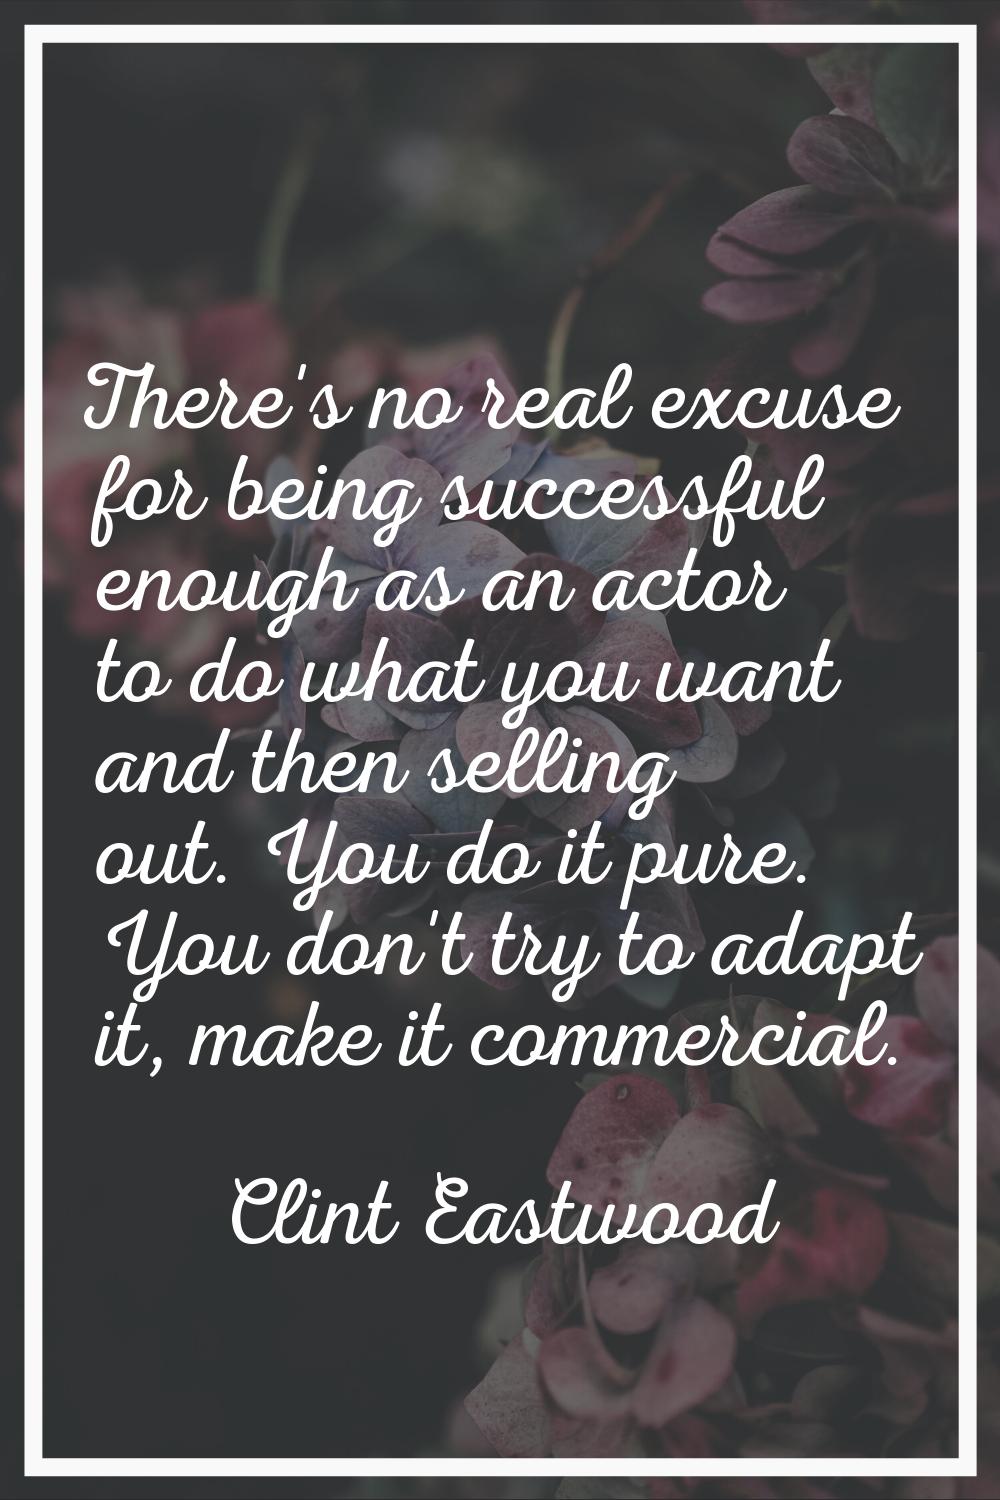 There's no real excuse for being successful enough as an actor to do what you want and then selling